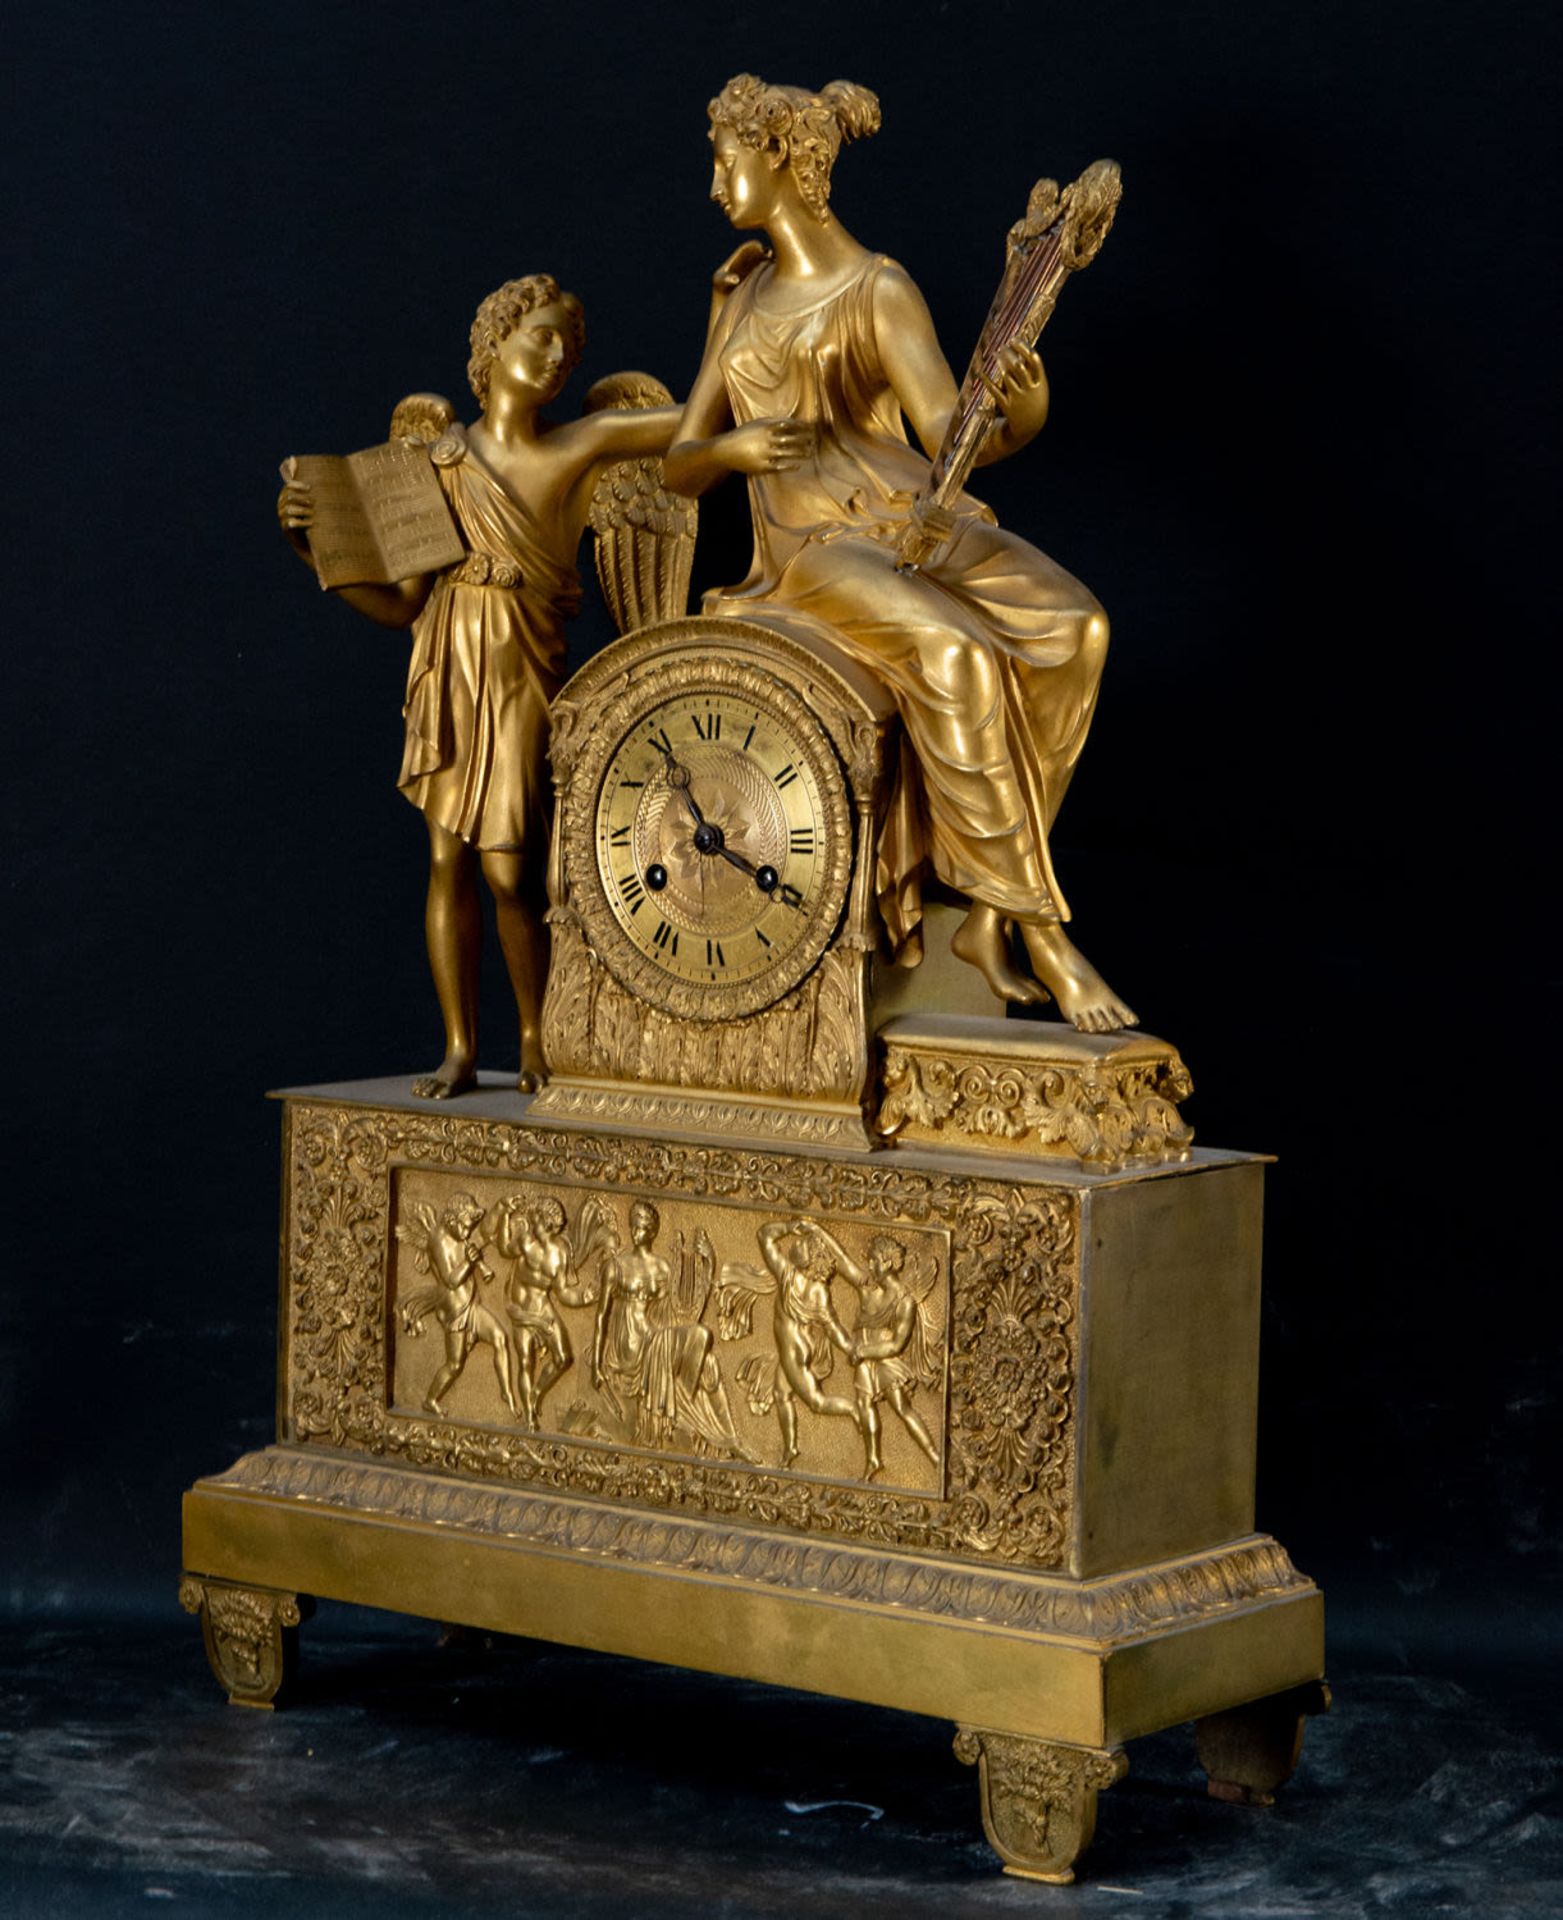 Large French Empire Clock in gilt bronze depicting Euterpe with Cupid, 19th century - Image 2 of 4